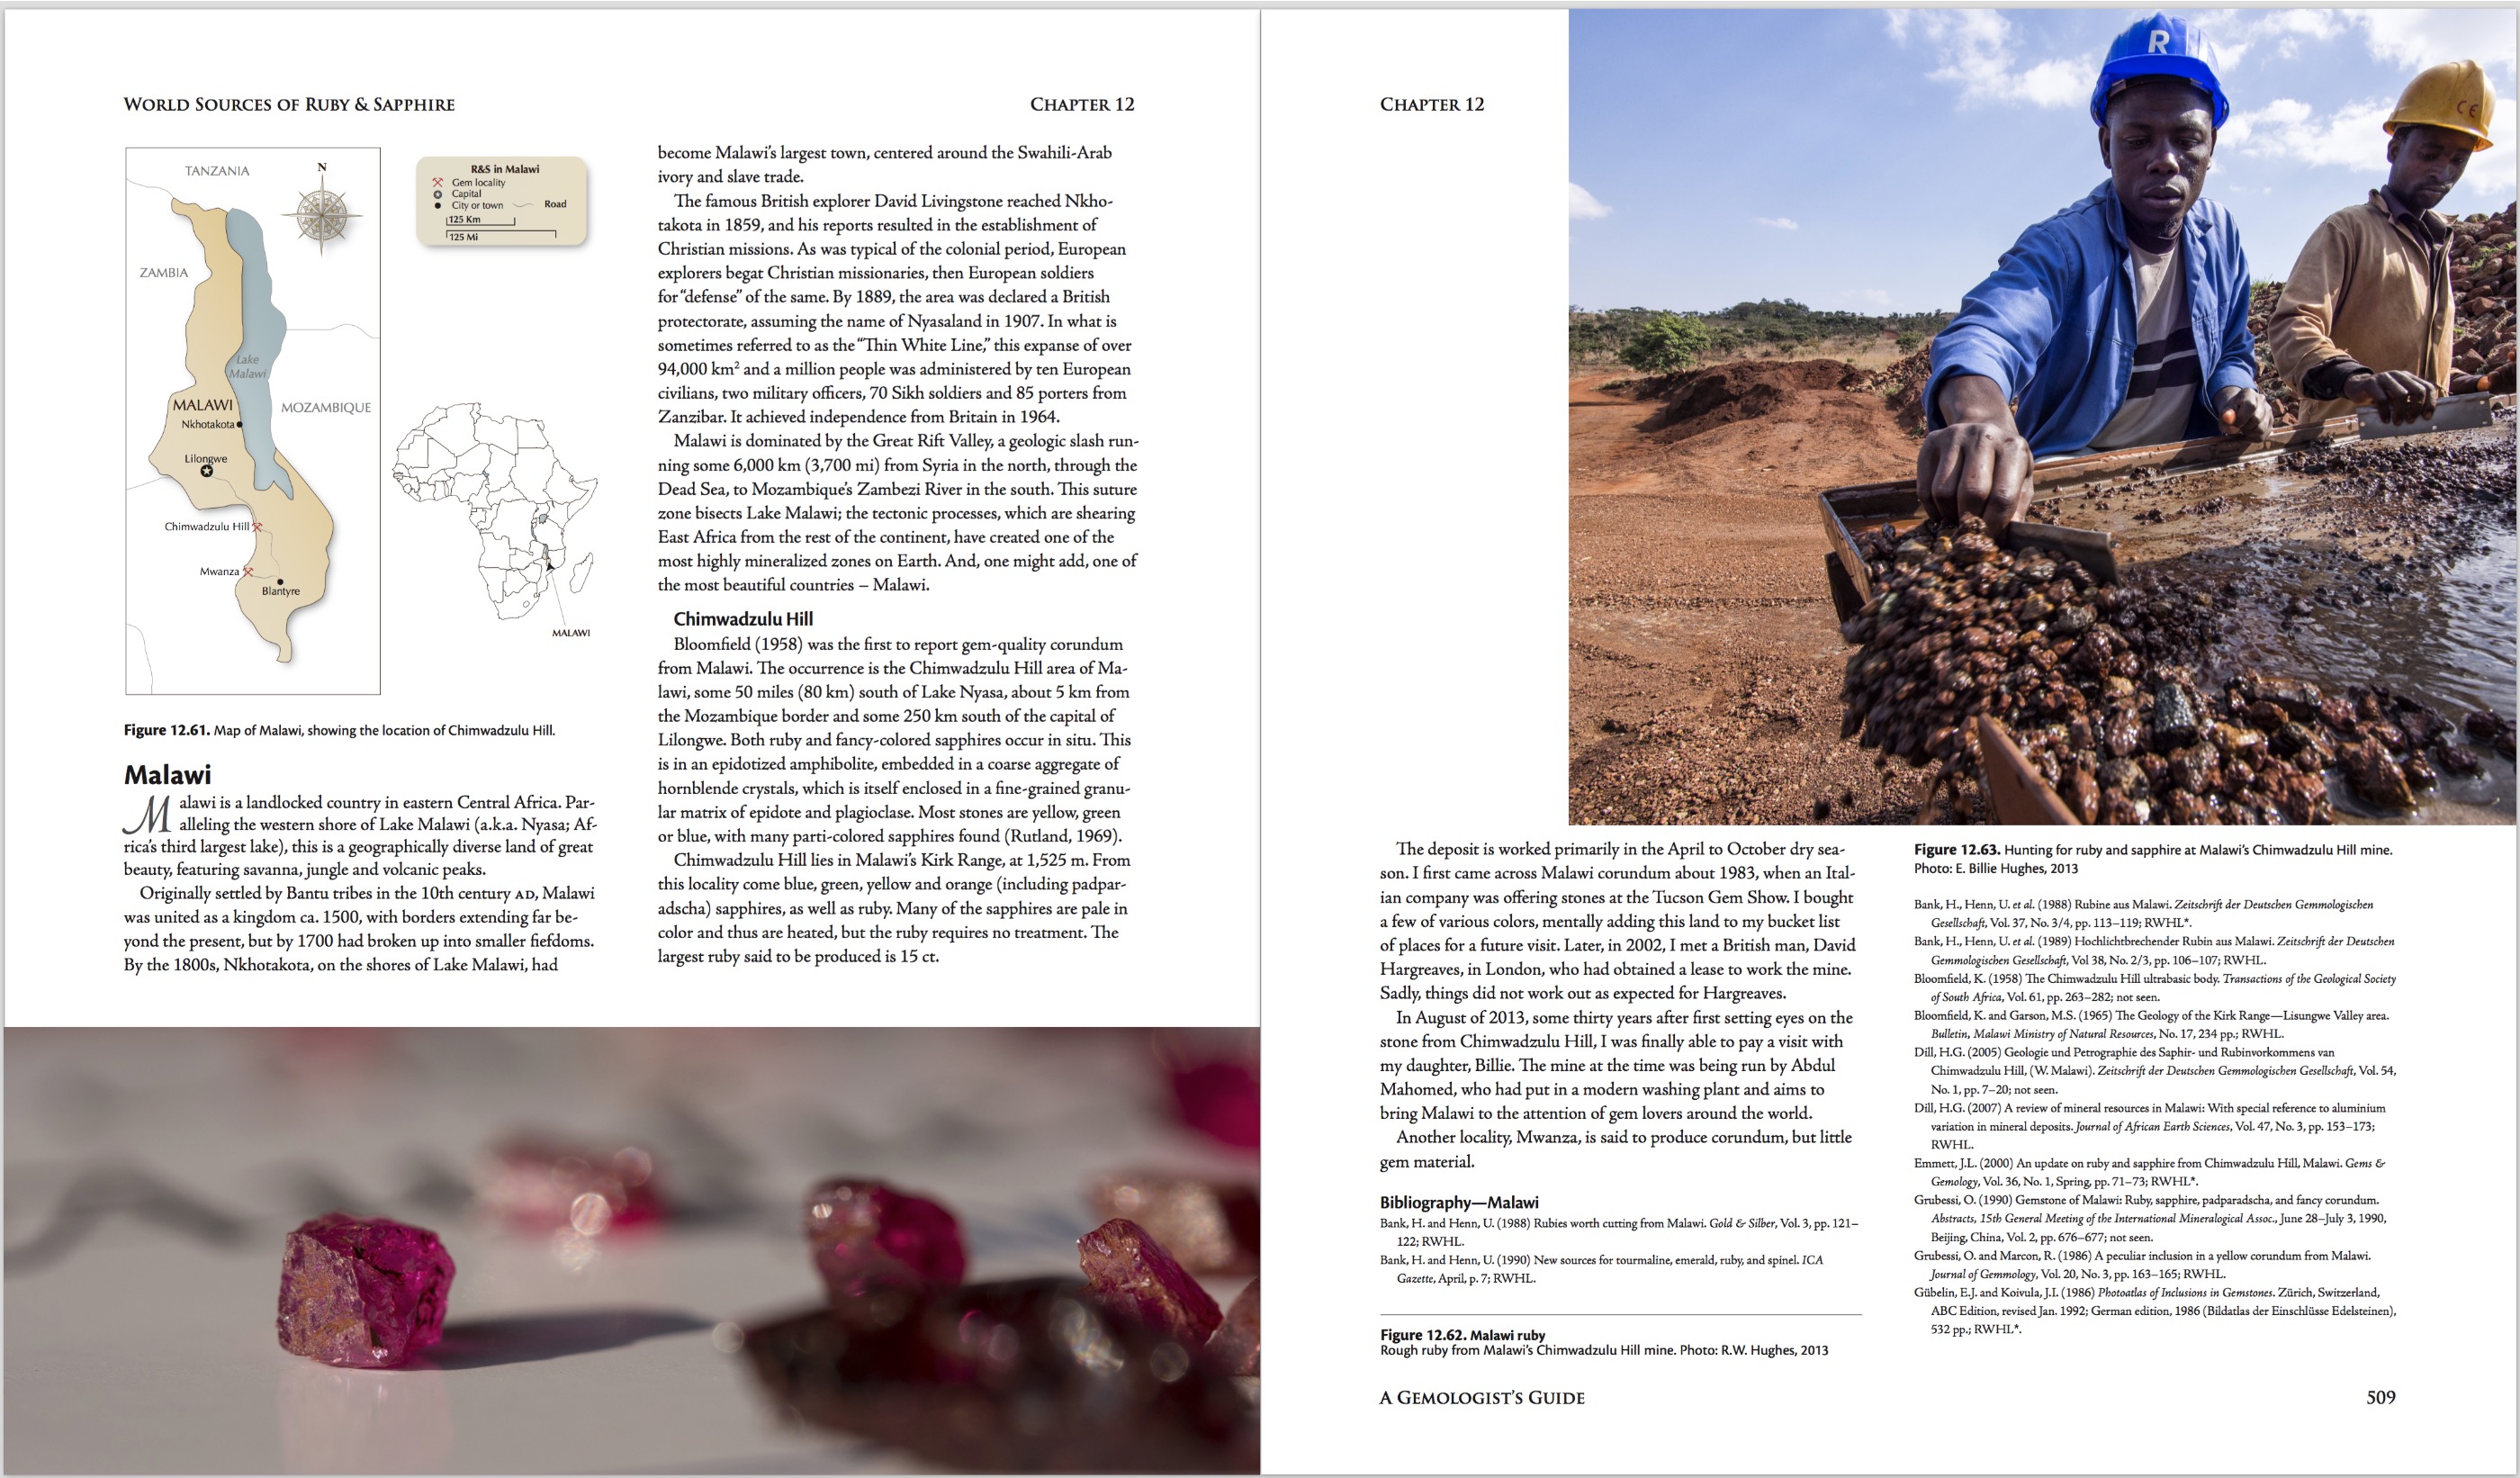 Ruby & Sapphire: A Gemologist's Guide – World Sources: Malawi